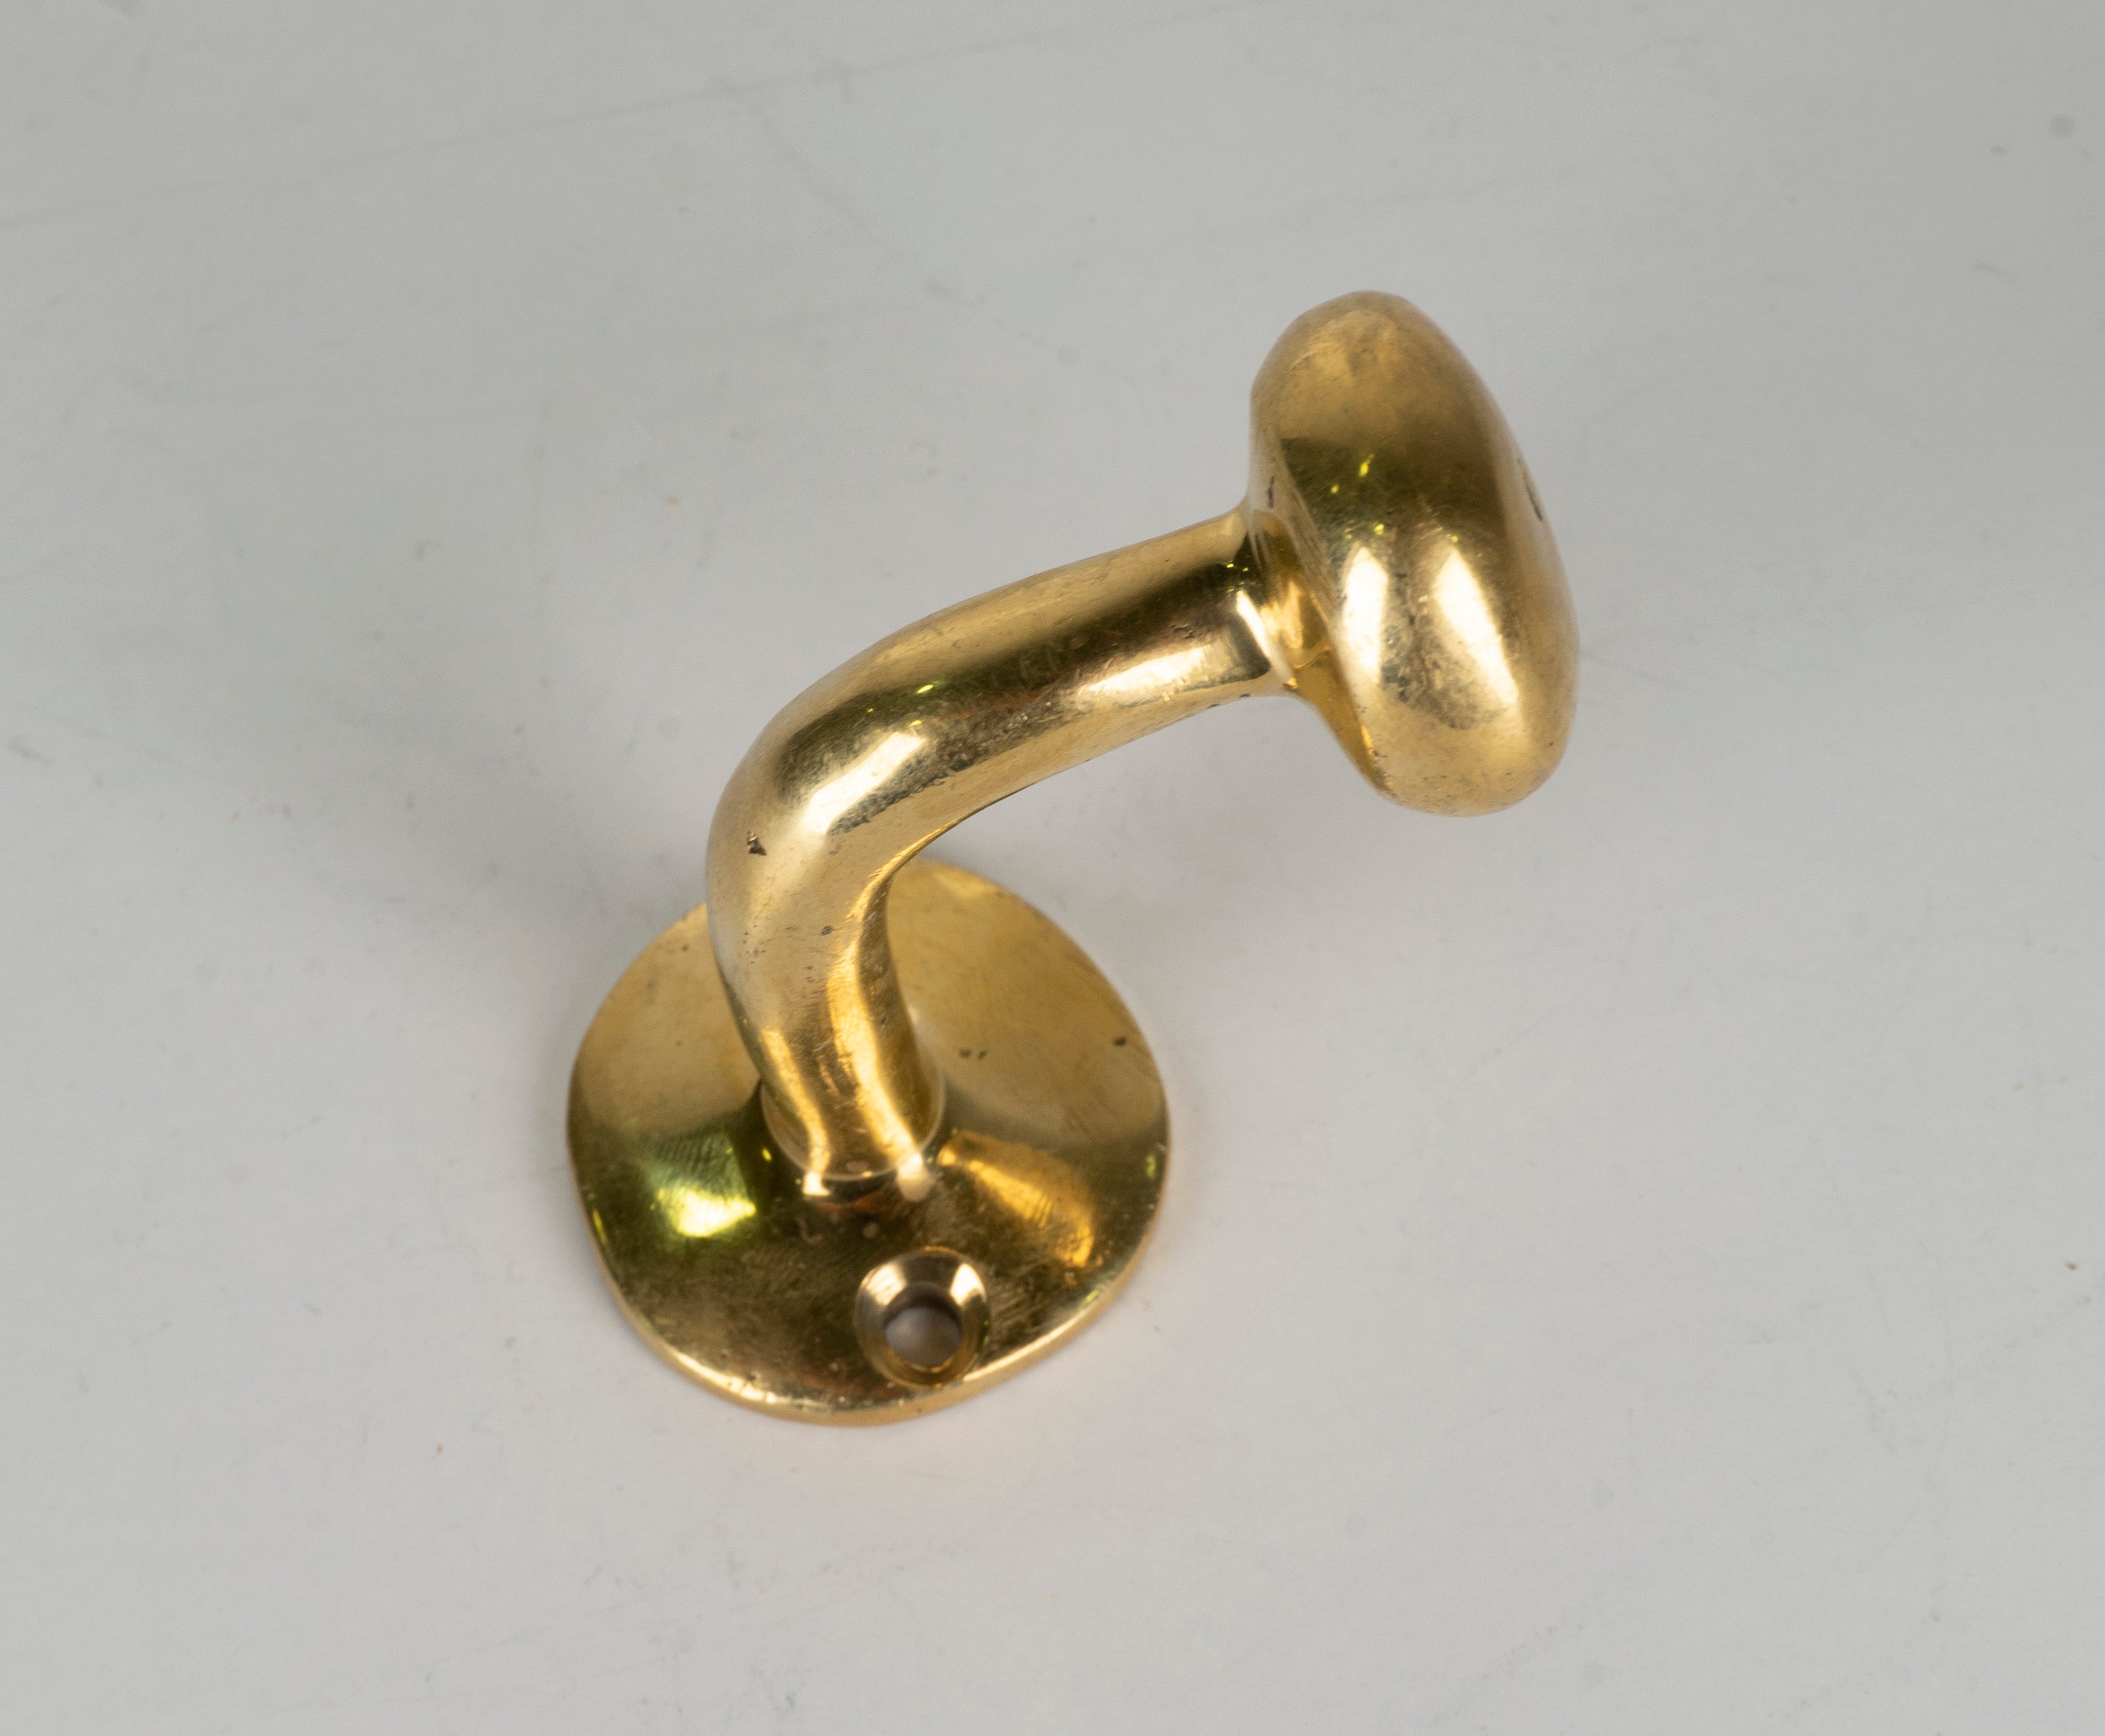 Handcrafted Unlacquered Solid Brass Wall Hooks - Zayian